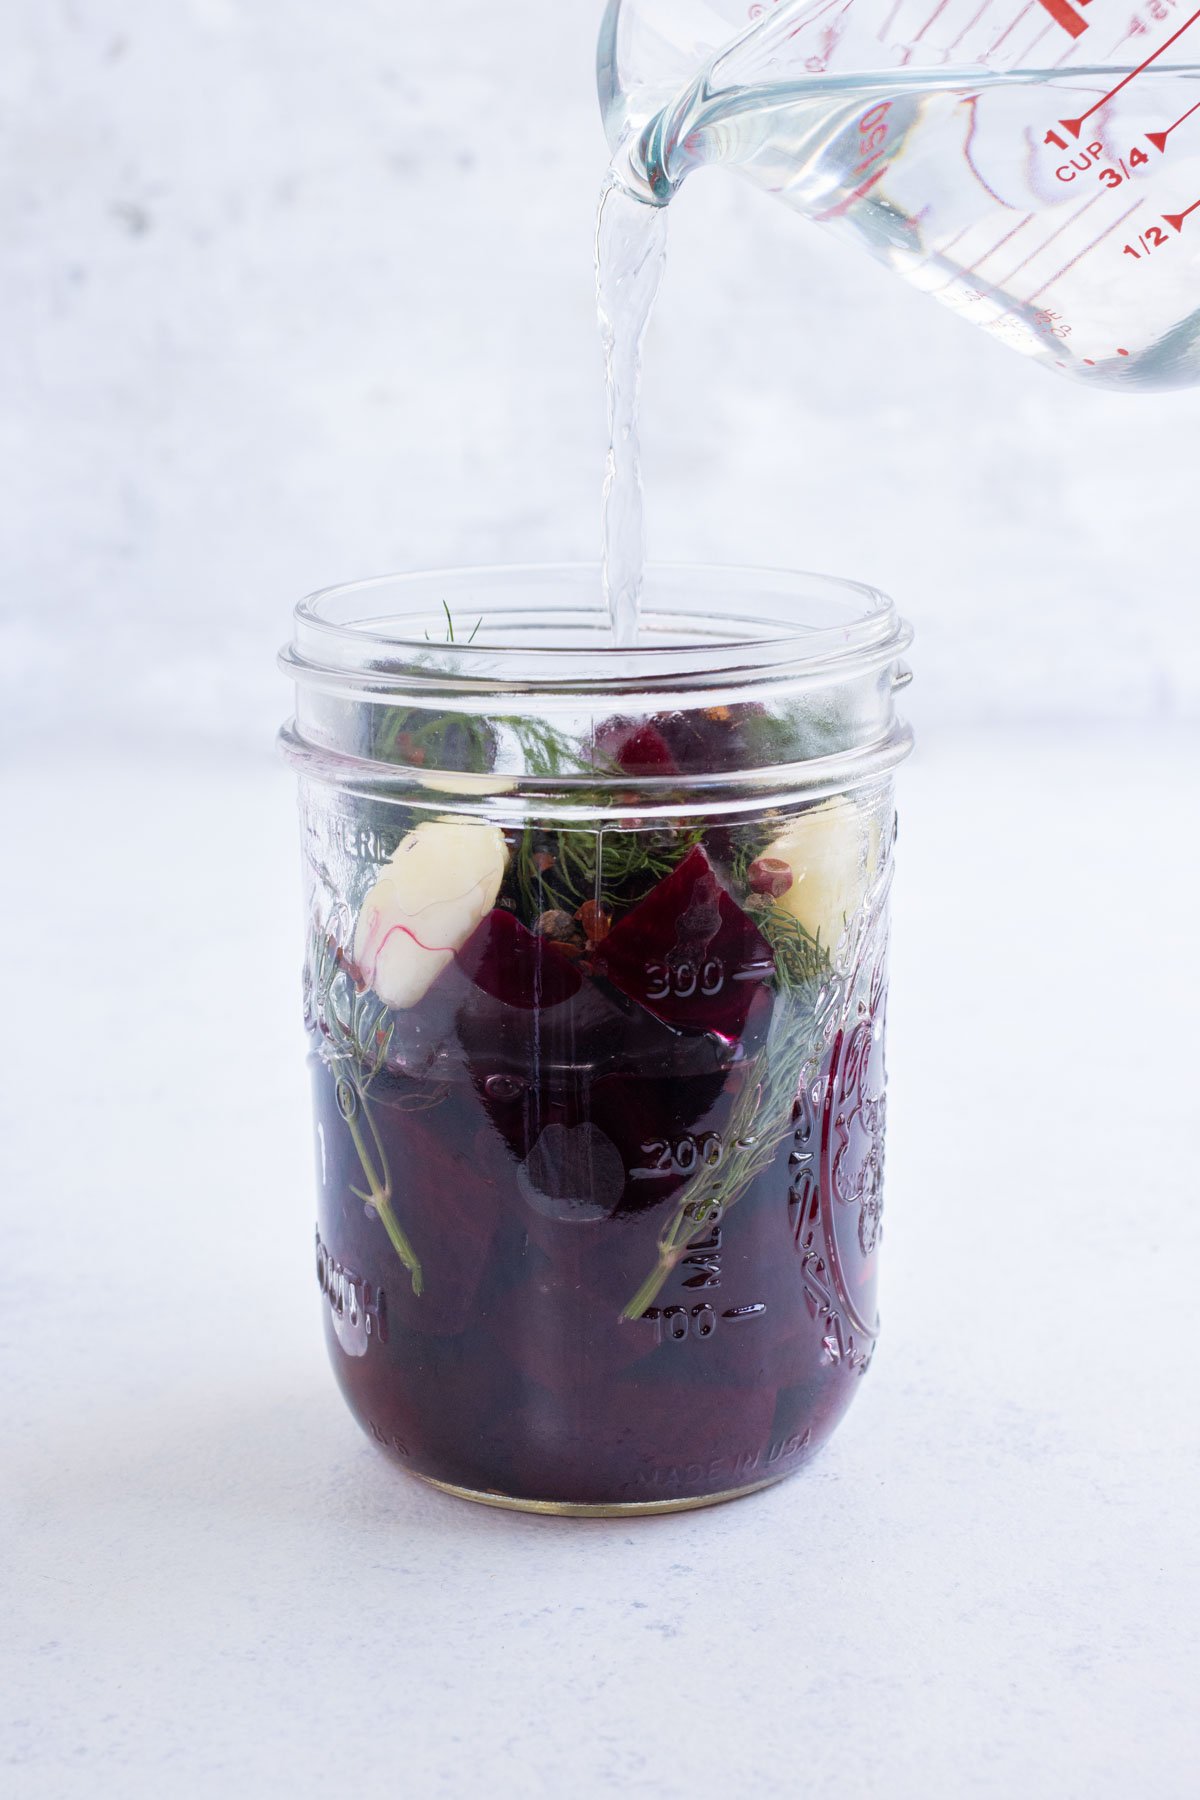 Brining solution is poured into a jar with roasted beets.